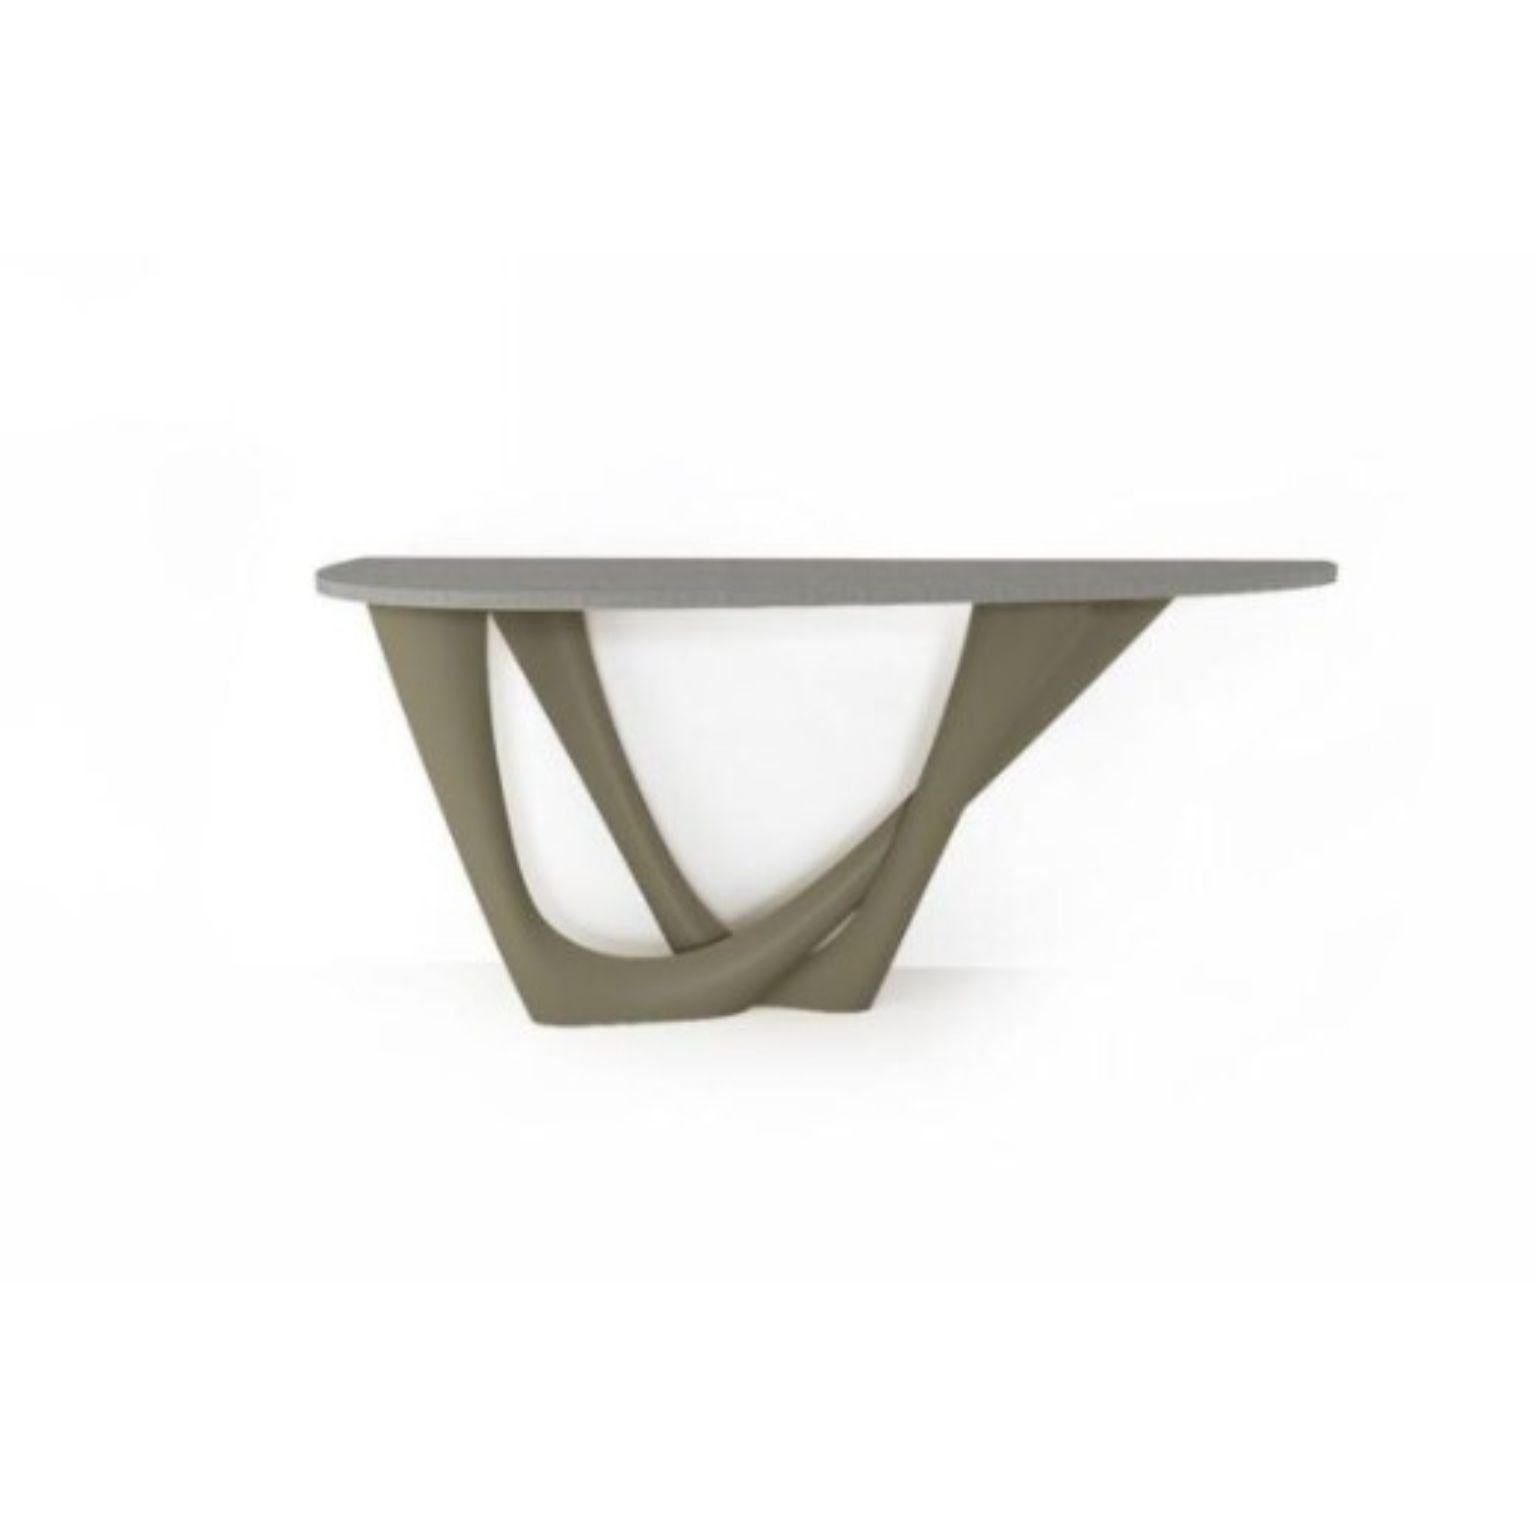 Moss grey G-console duo concrete top and steel base by Zieta
Dimensions: D 56 x W 168 x H 75 cm 
Material: Carbon steel, concrete.
Also available in different colors and dimensions.

G-Console is another bionic object in our collection. Created for